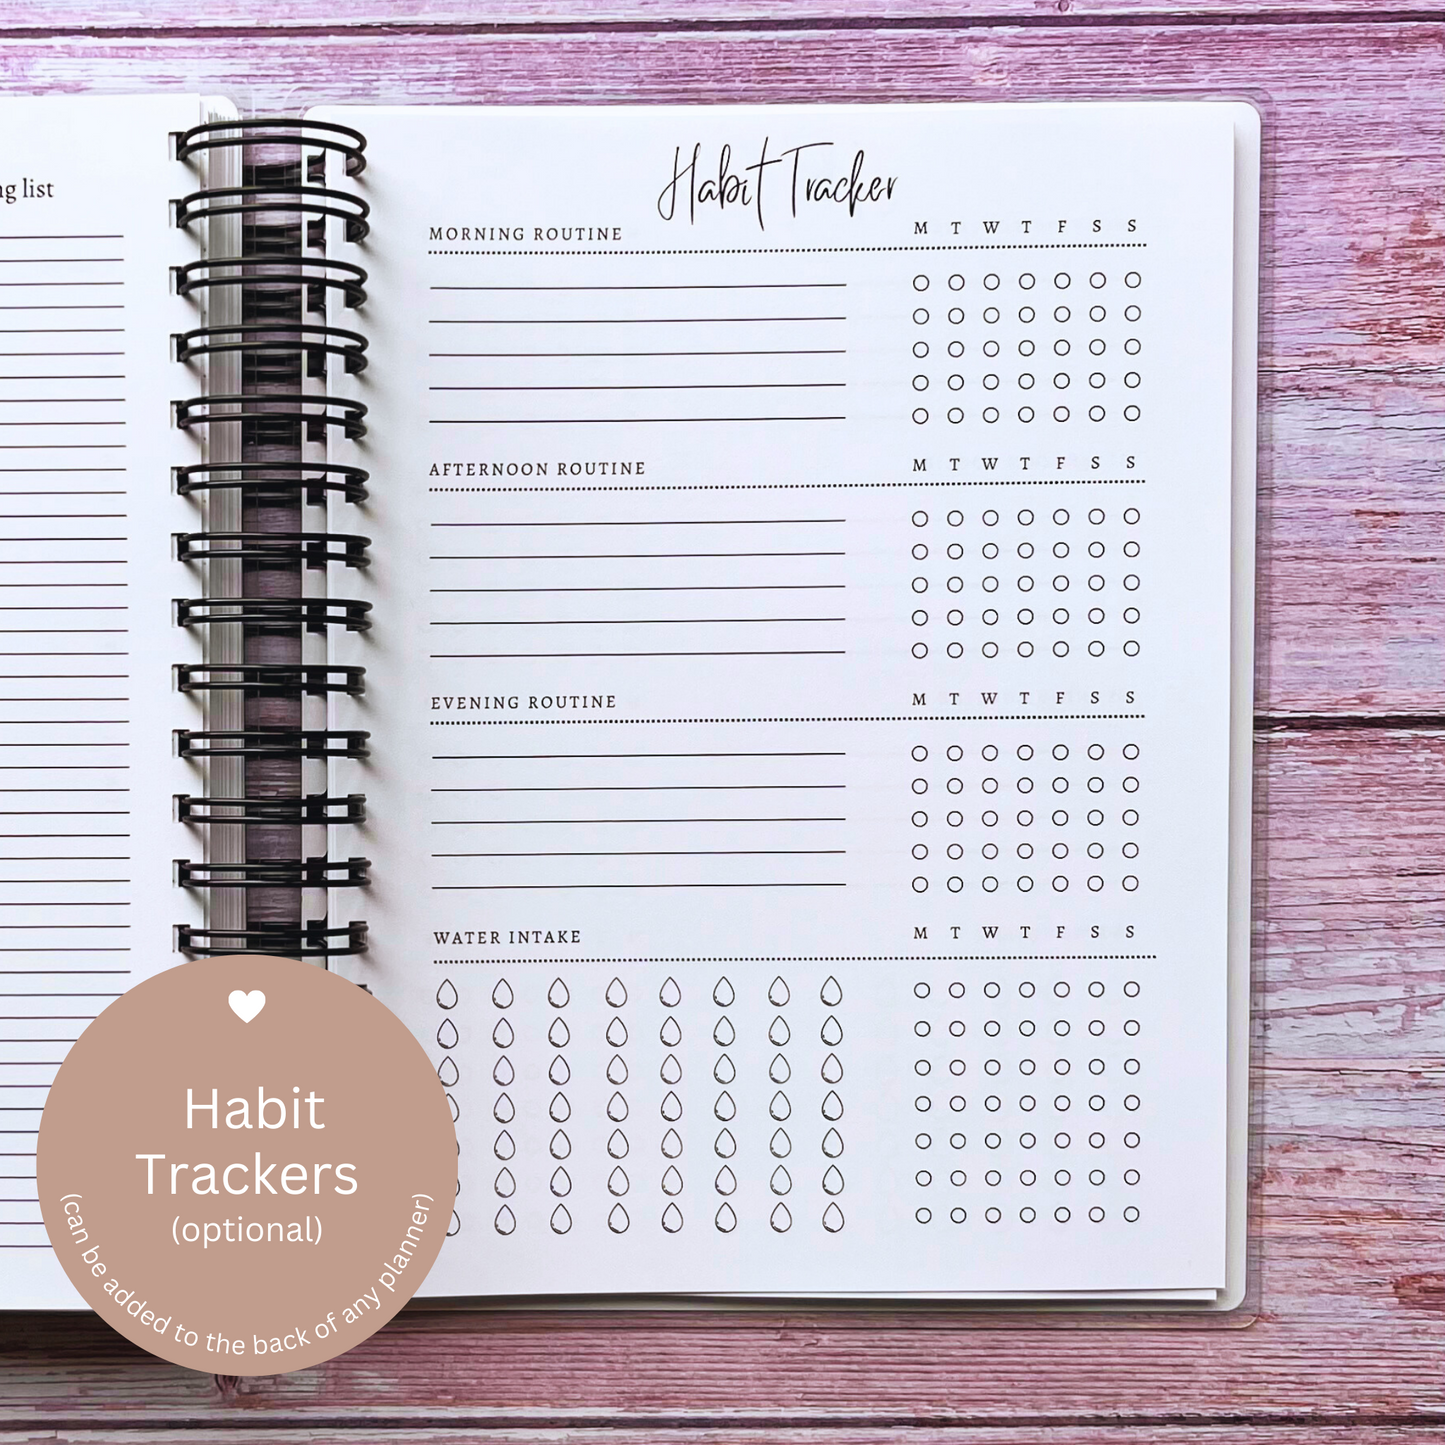 Personalized Monthly Planner - Heart Sing